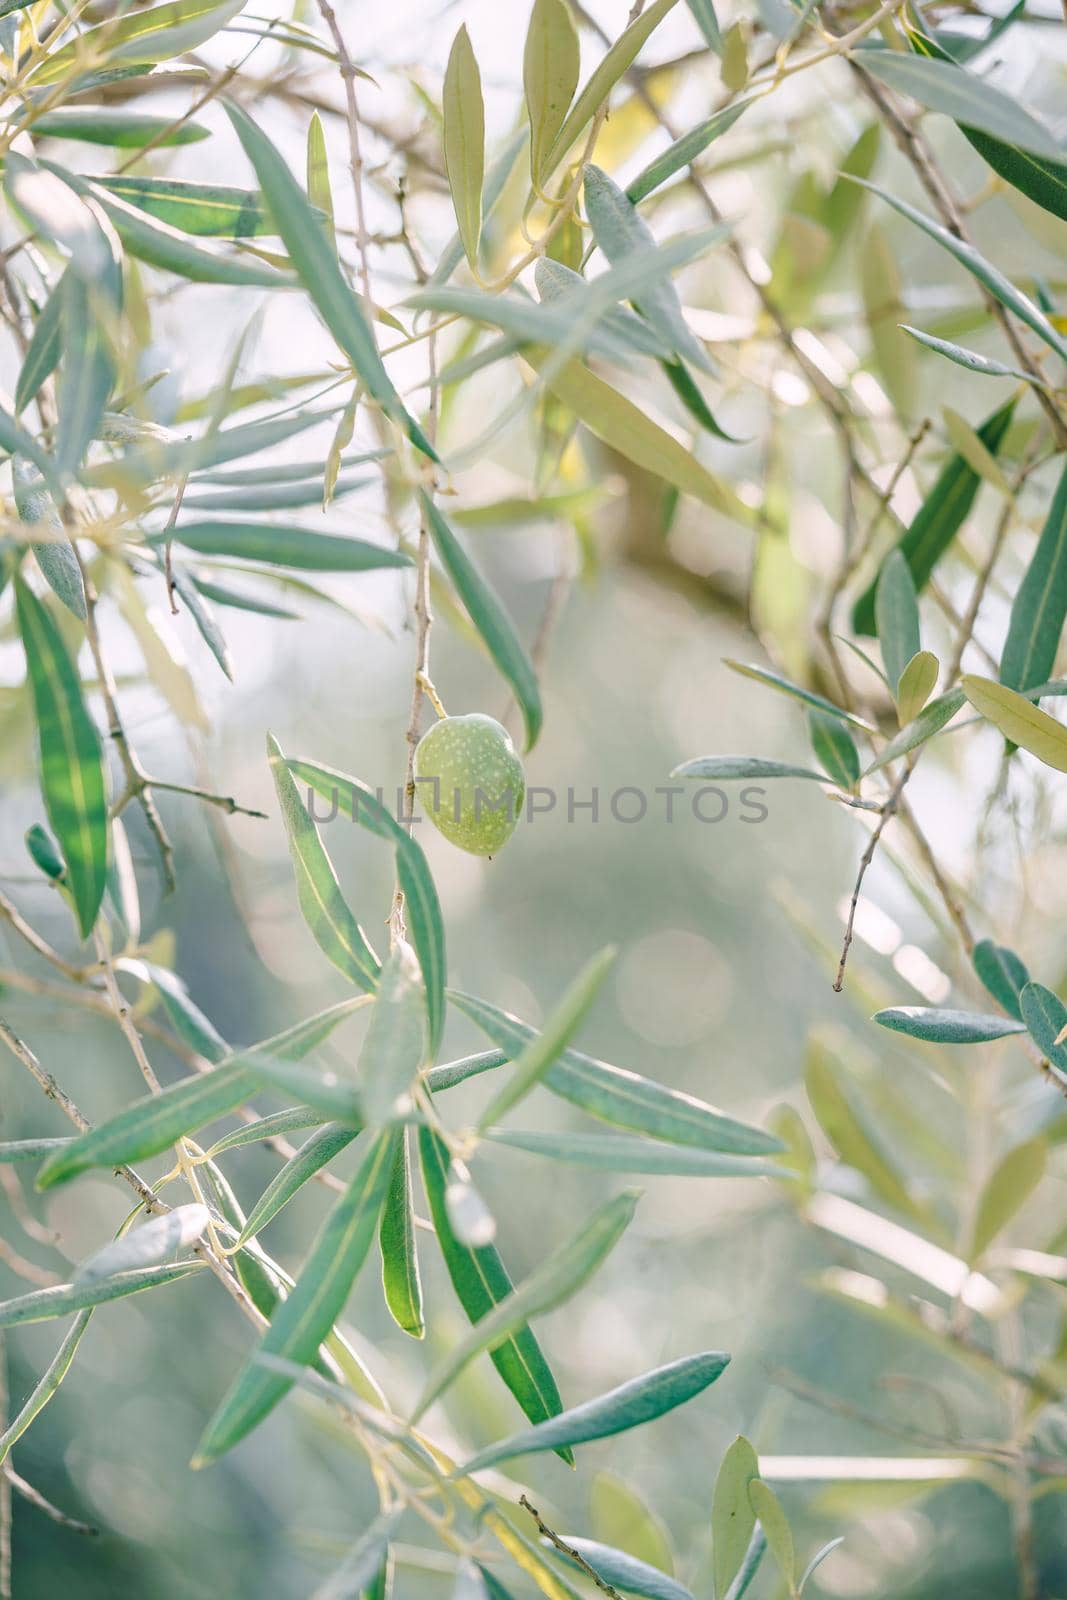 A close-up of olives on a tree branch. Blurred background.